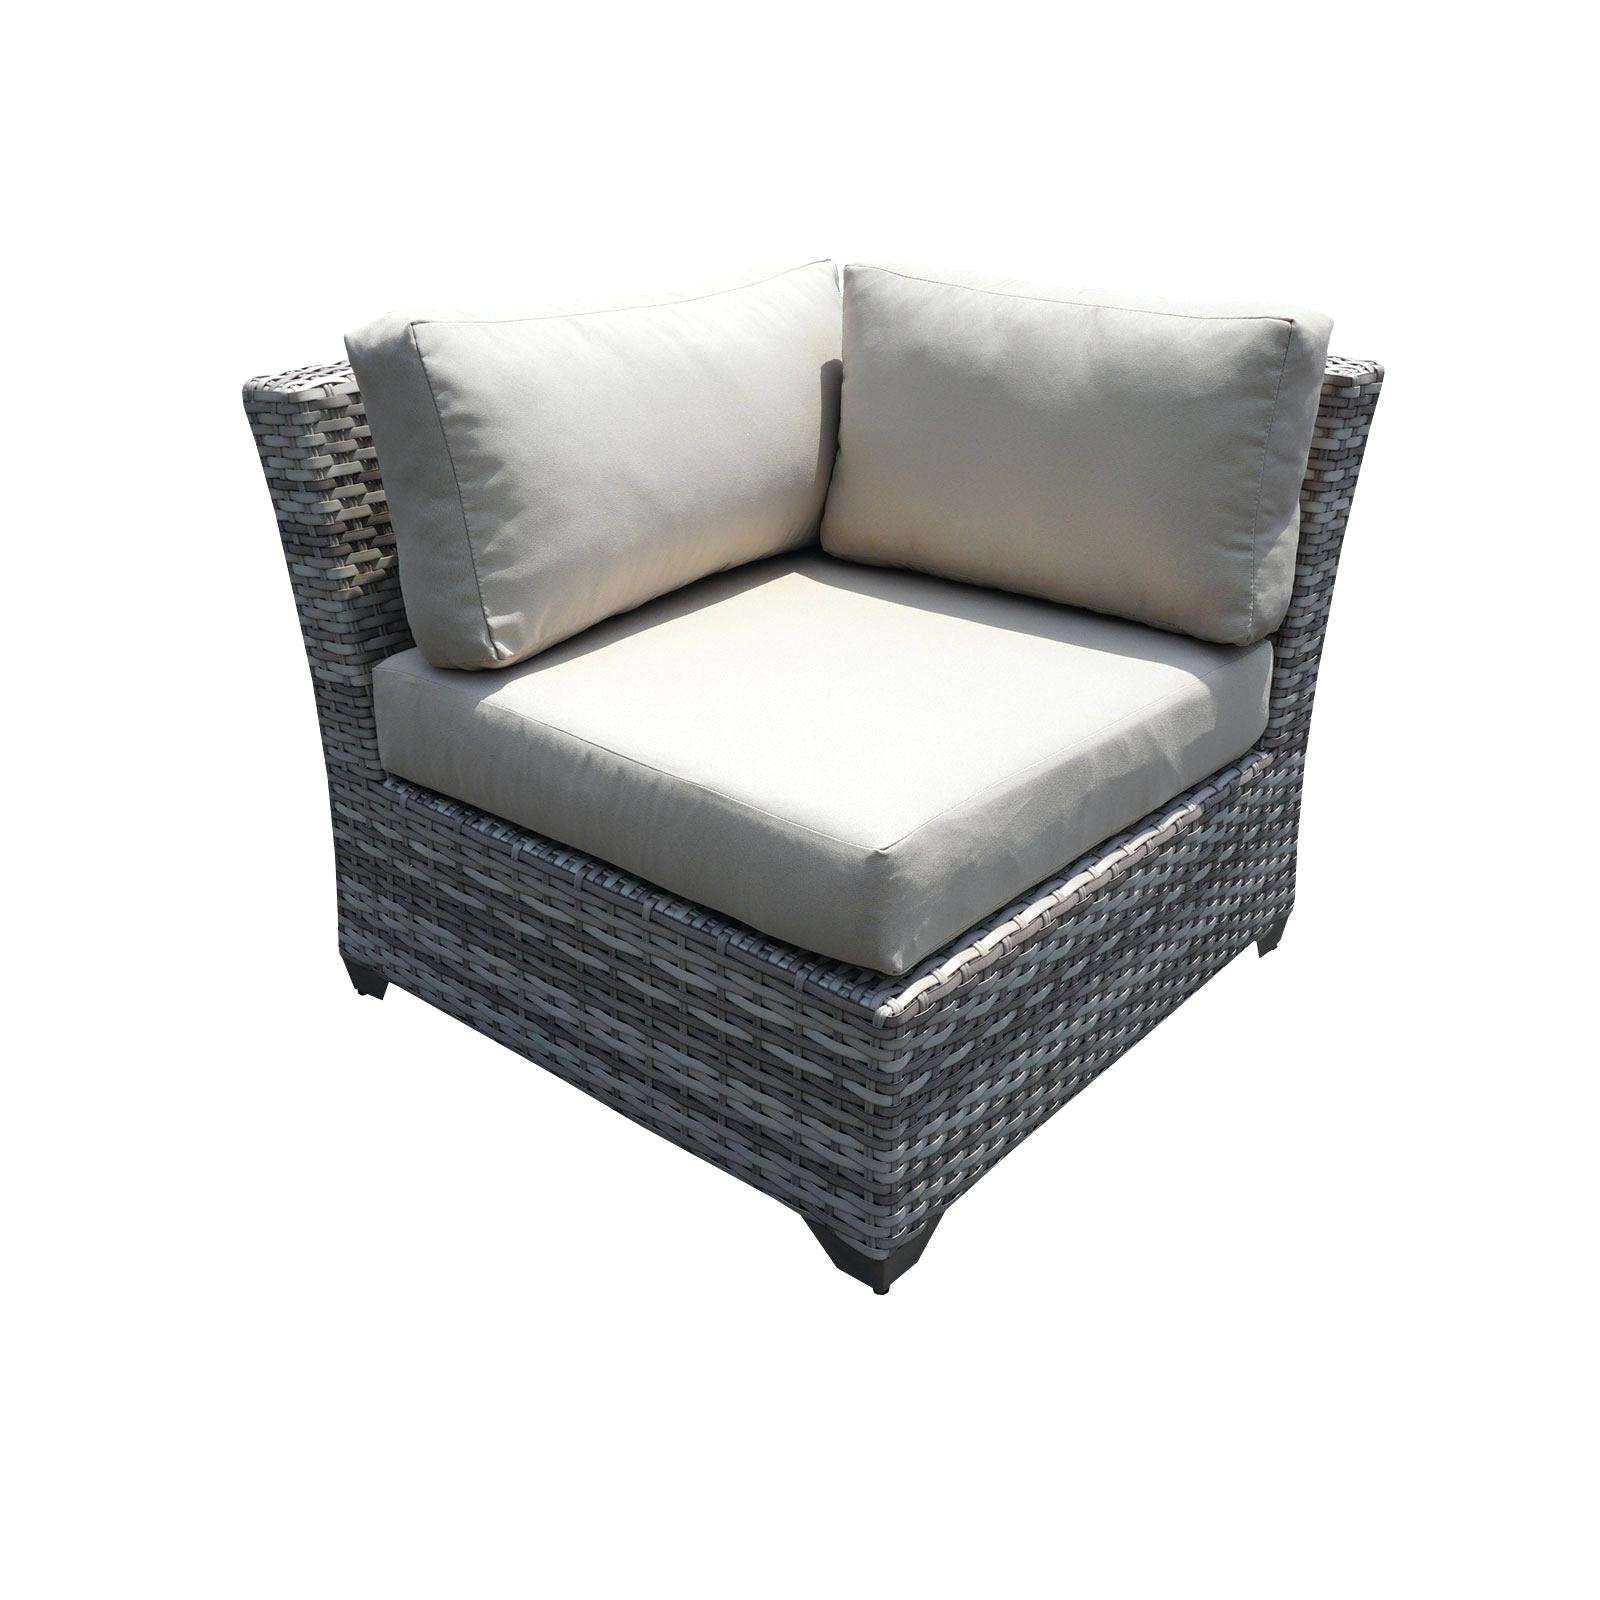 patio furniture outlet stylish wicker outdoor sofa 0d patio chairs sale replacement cushions ideas elegant